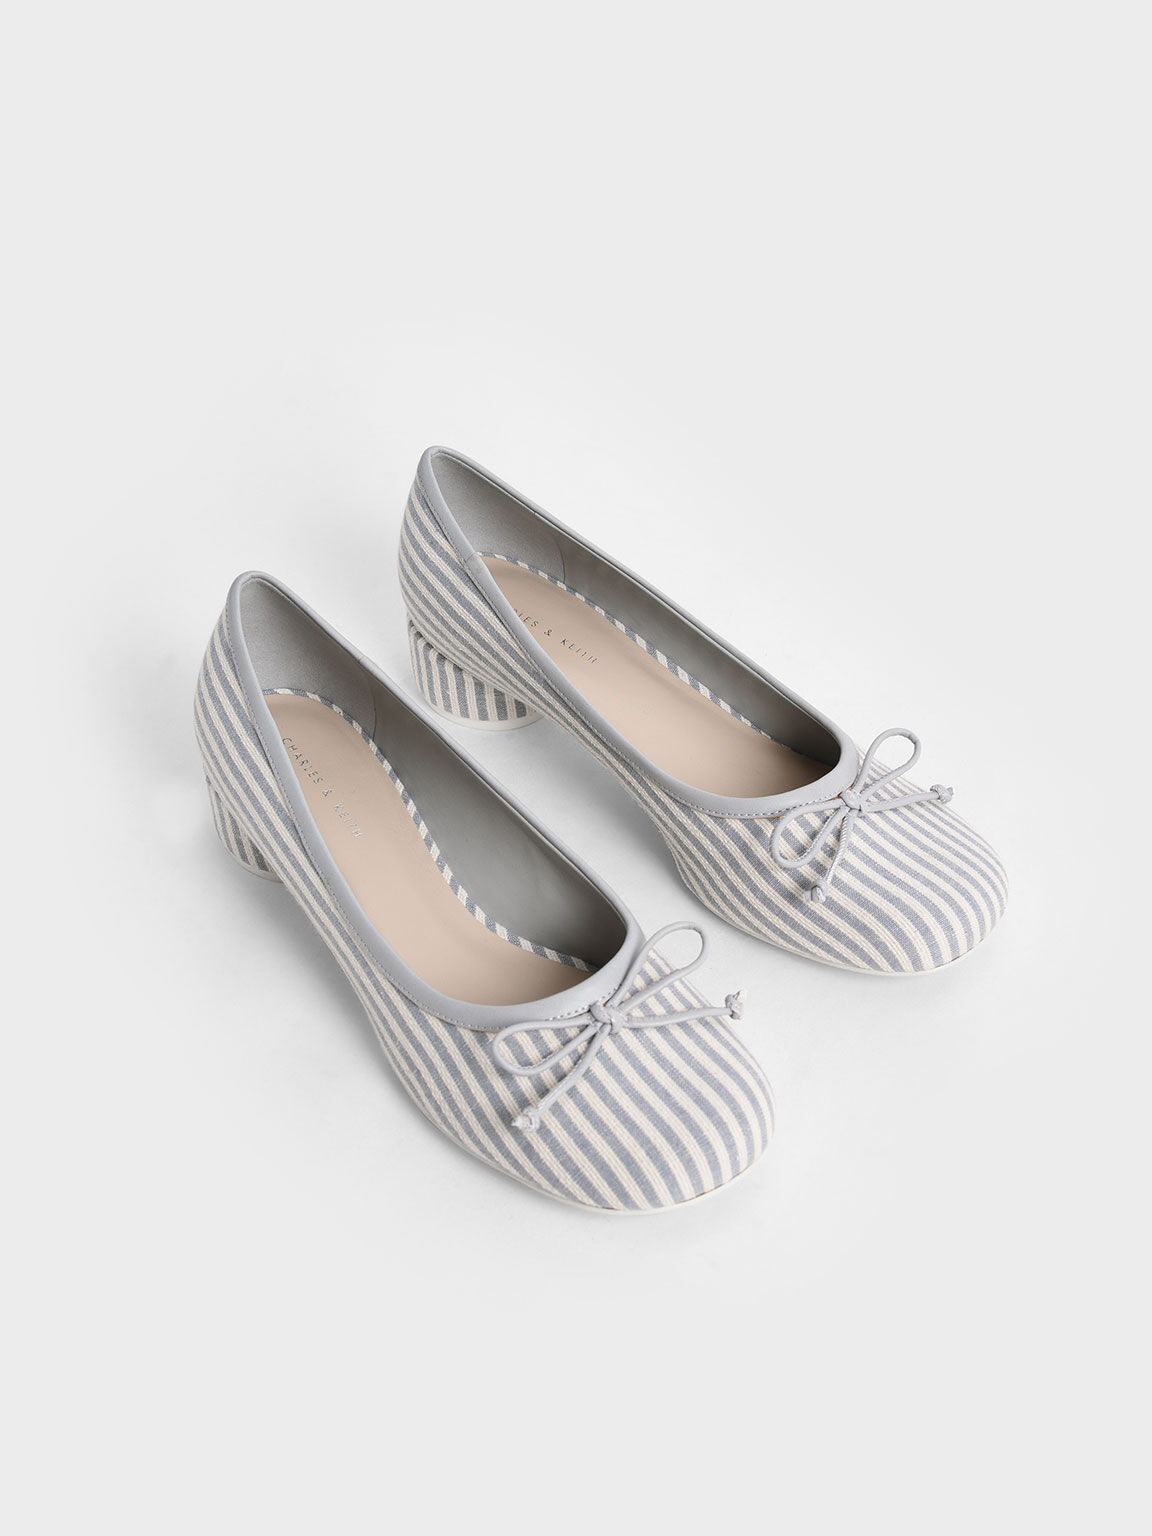 Striped Bow Cylindrical Heel Pumps, Light Blue, hi-res